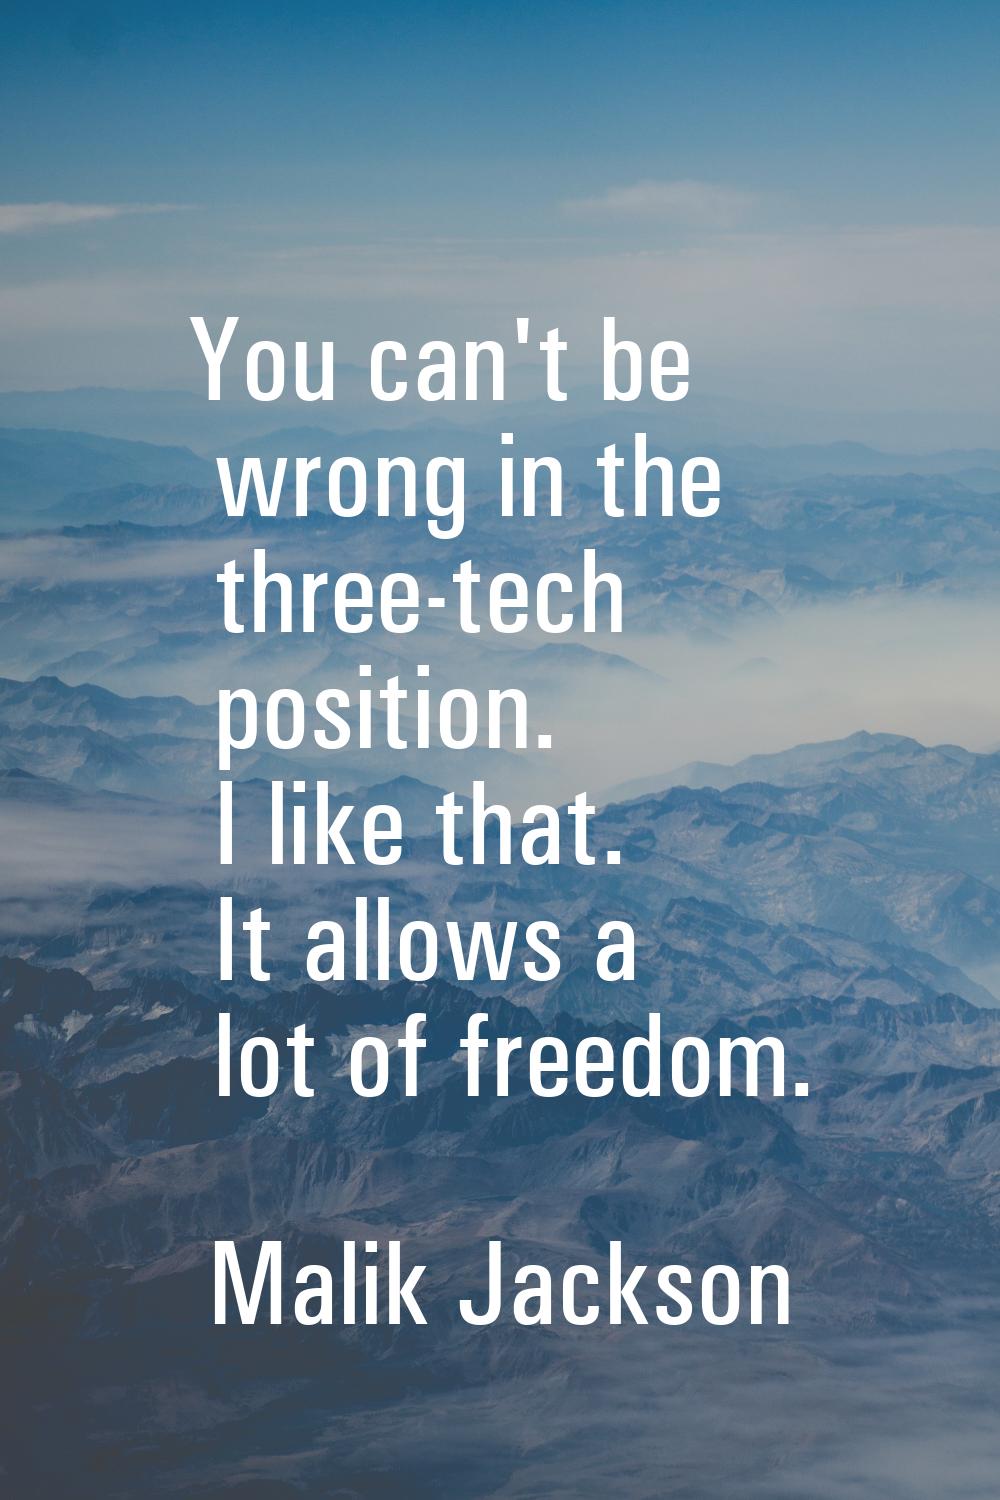 You can't be wrong in the three-tech position. I like that. It allows a lot of freedom.